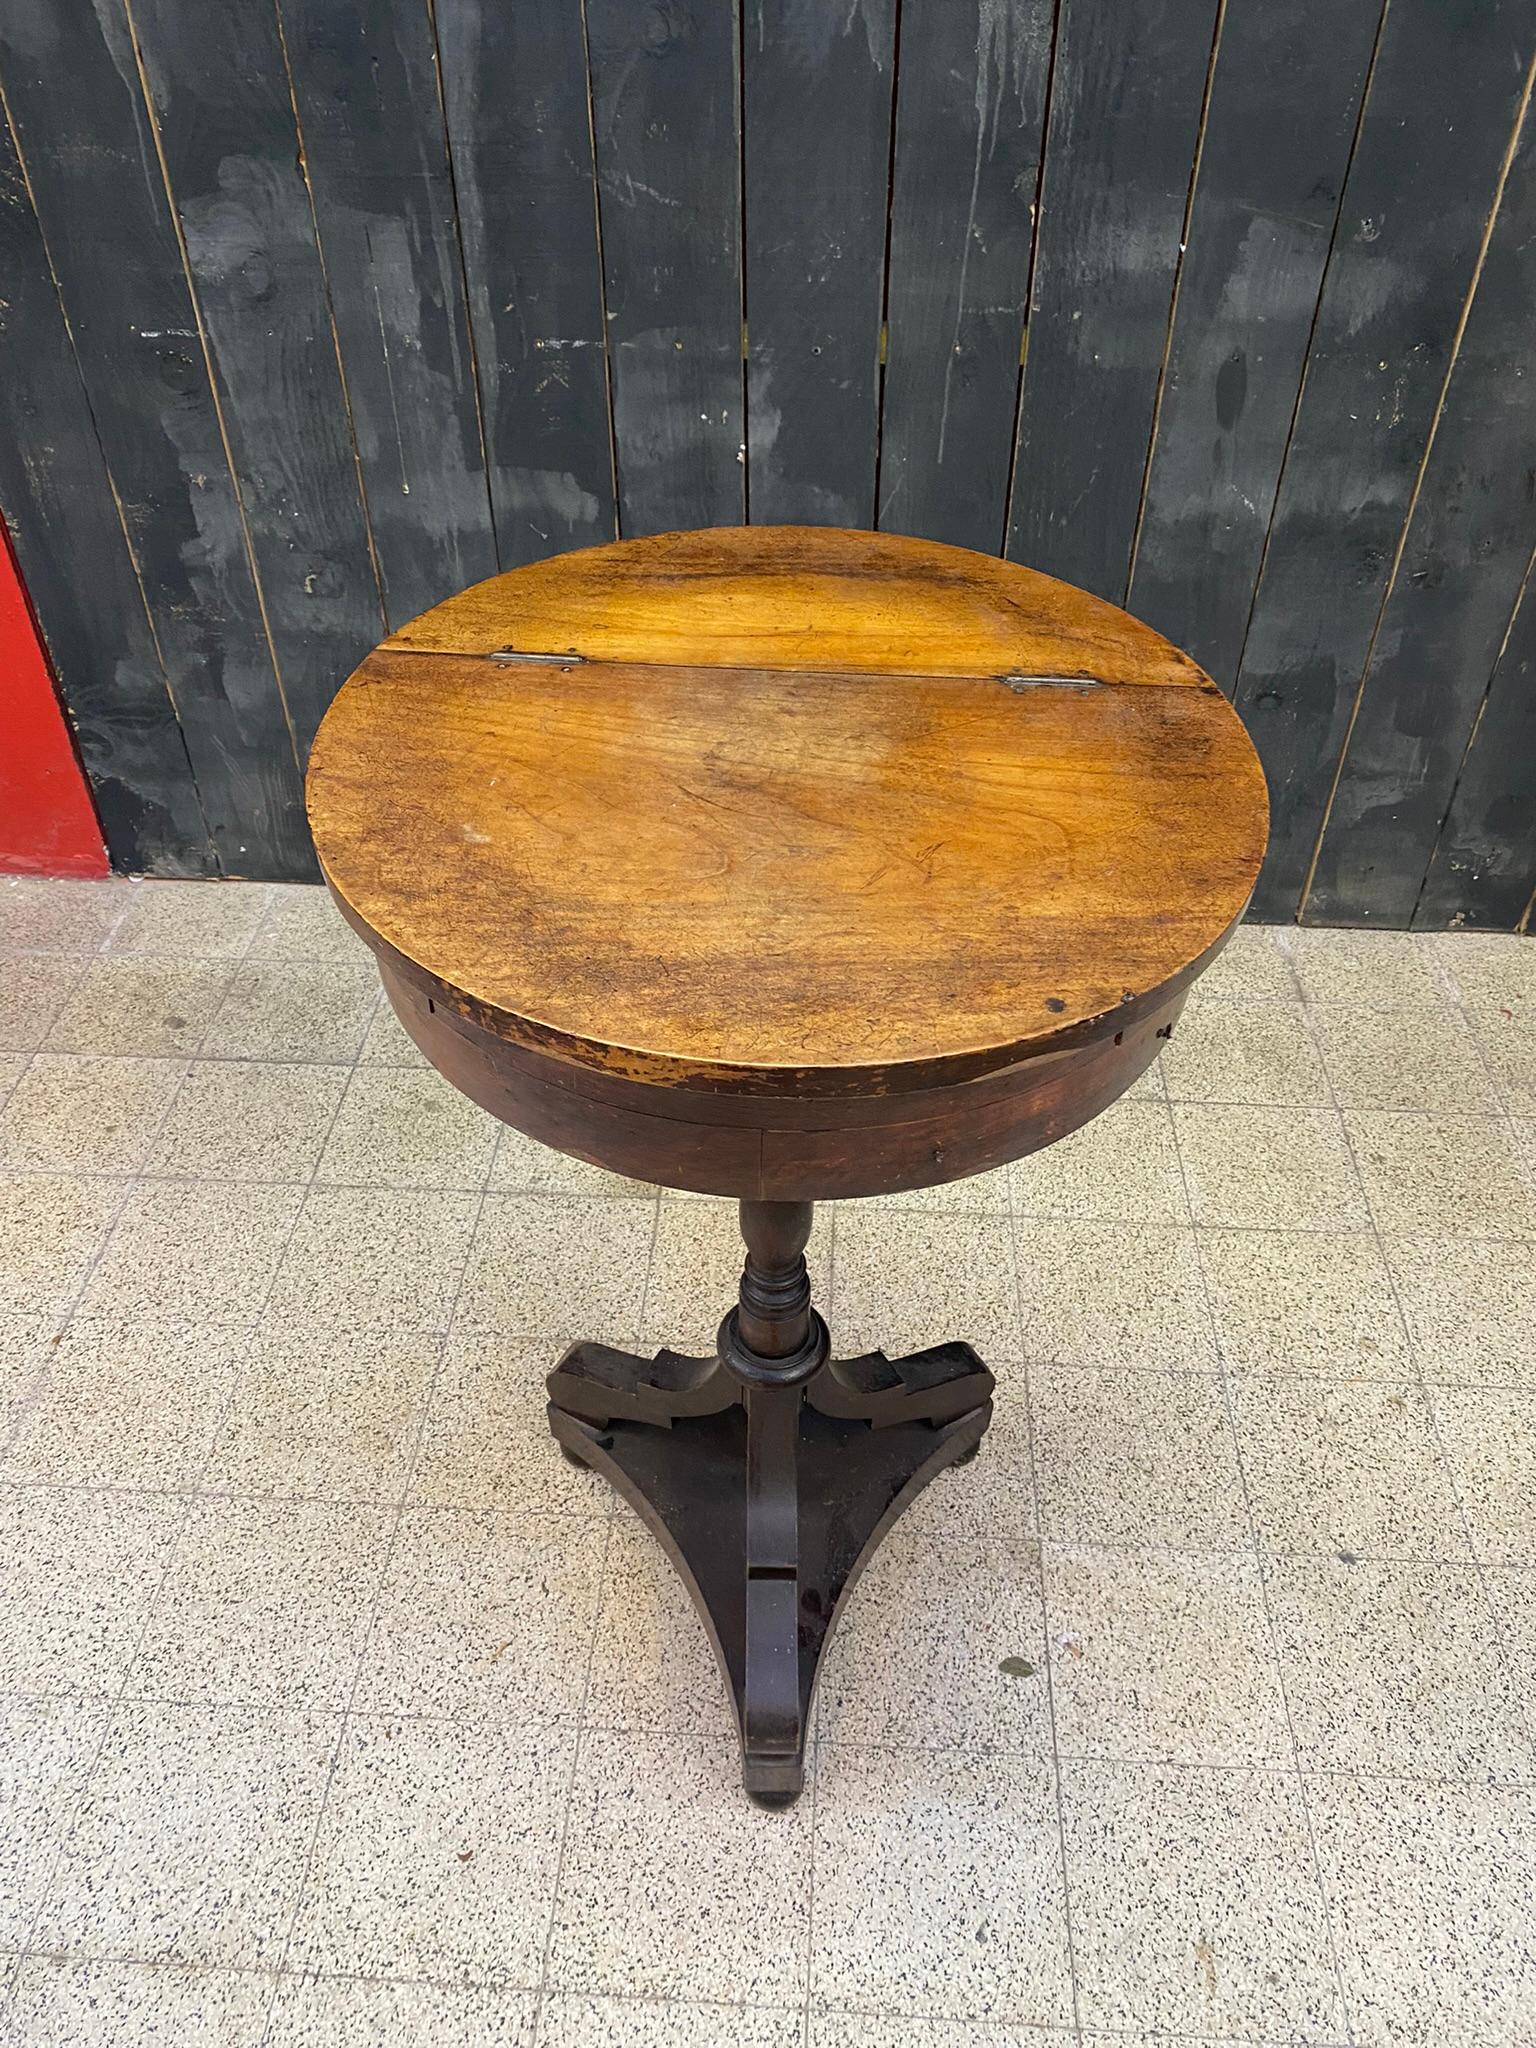 Blackened Charming Cherry Wood Side Table Napoleon III Period Good Condition For Sale